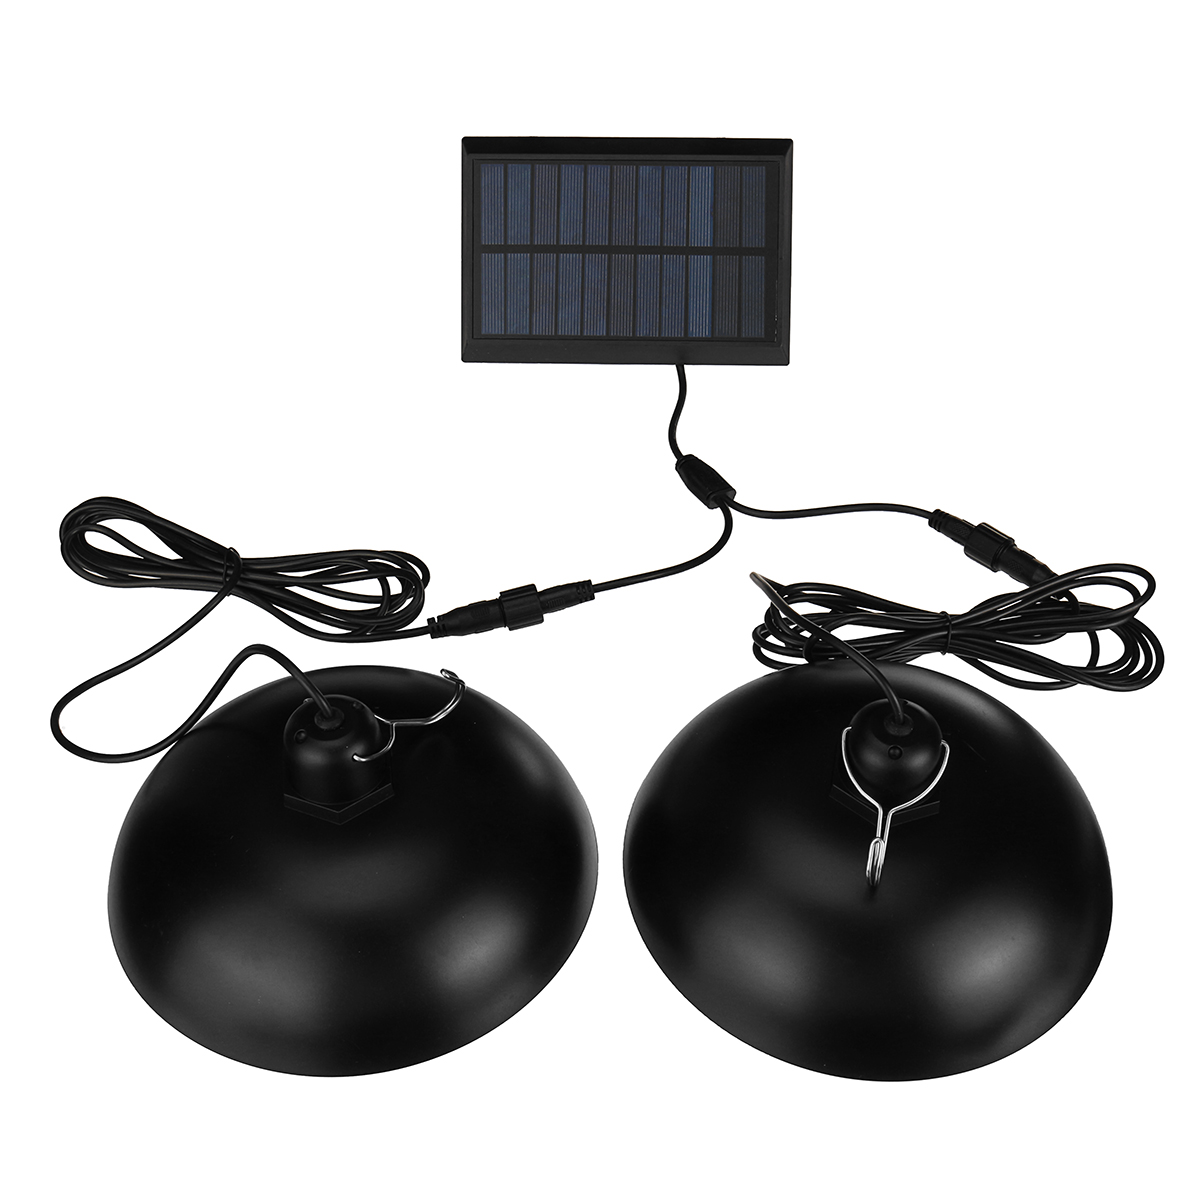 Split-Solar-Light-Remote-Led-Lights-With-Extension-Outdoor-Waterproof-Wall-Lamp-Sunlight-Powered-Lan-1935370-6